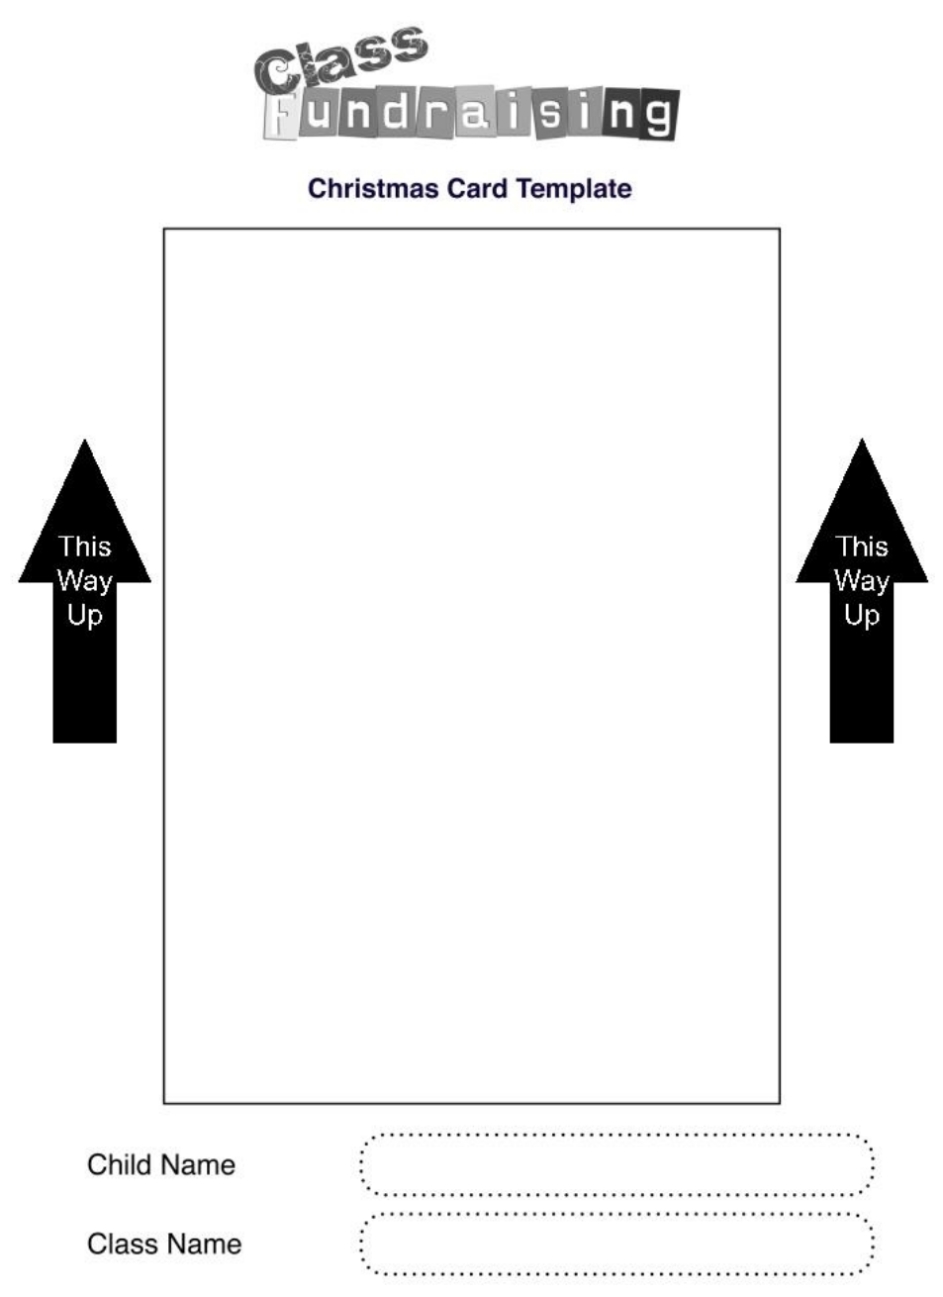 Blank Christmas Card Template Free Download Regarding Blank Christmas Card Templates Free